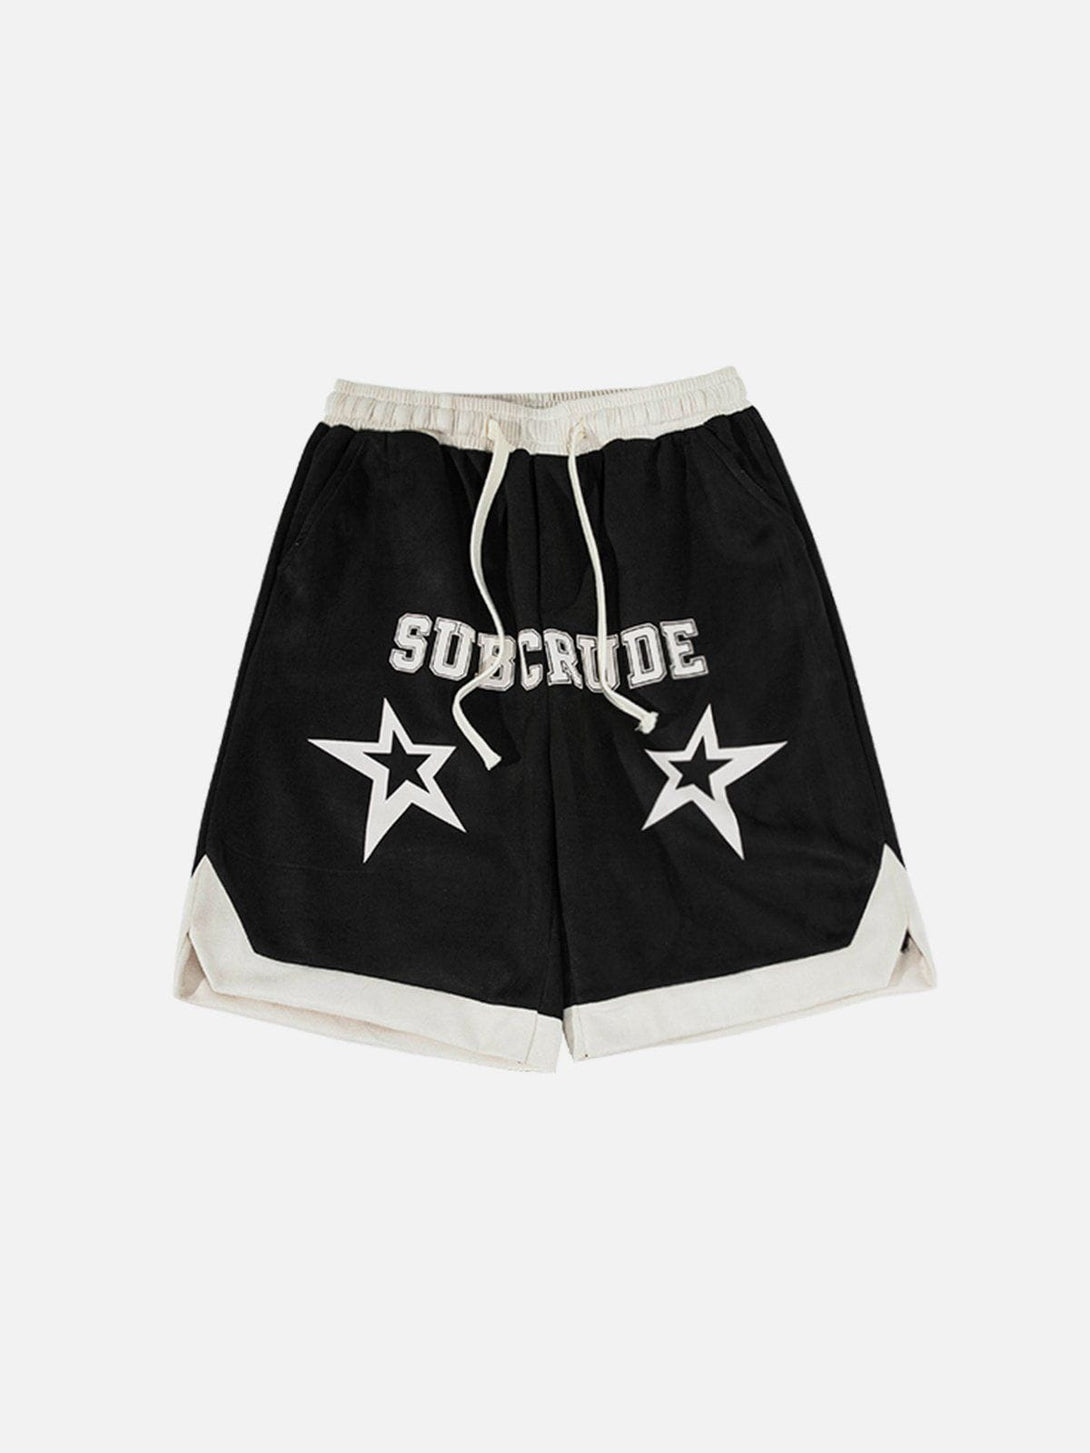 Majesda® - Letters Star Shorts outfit ideas streetwear fashion